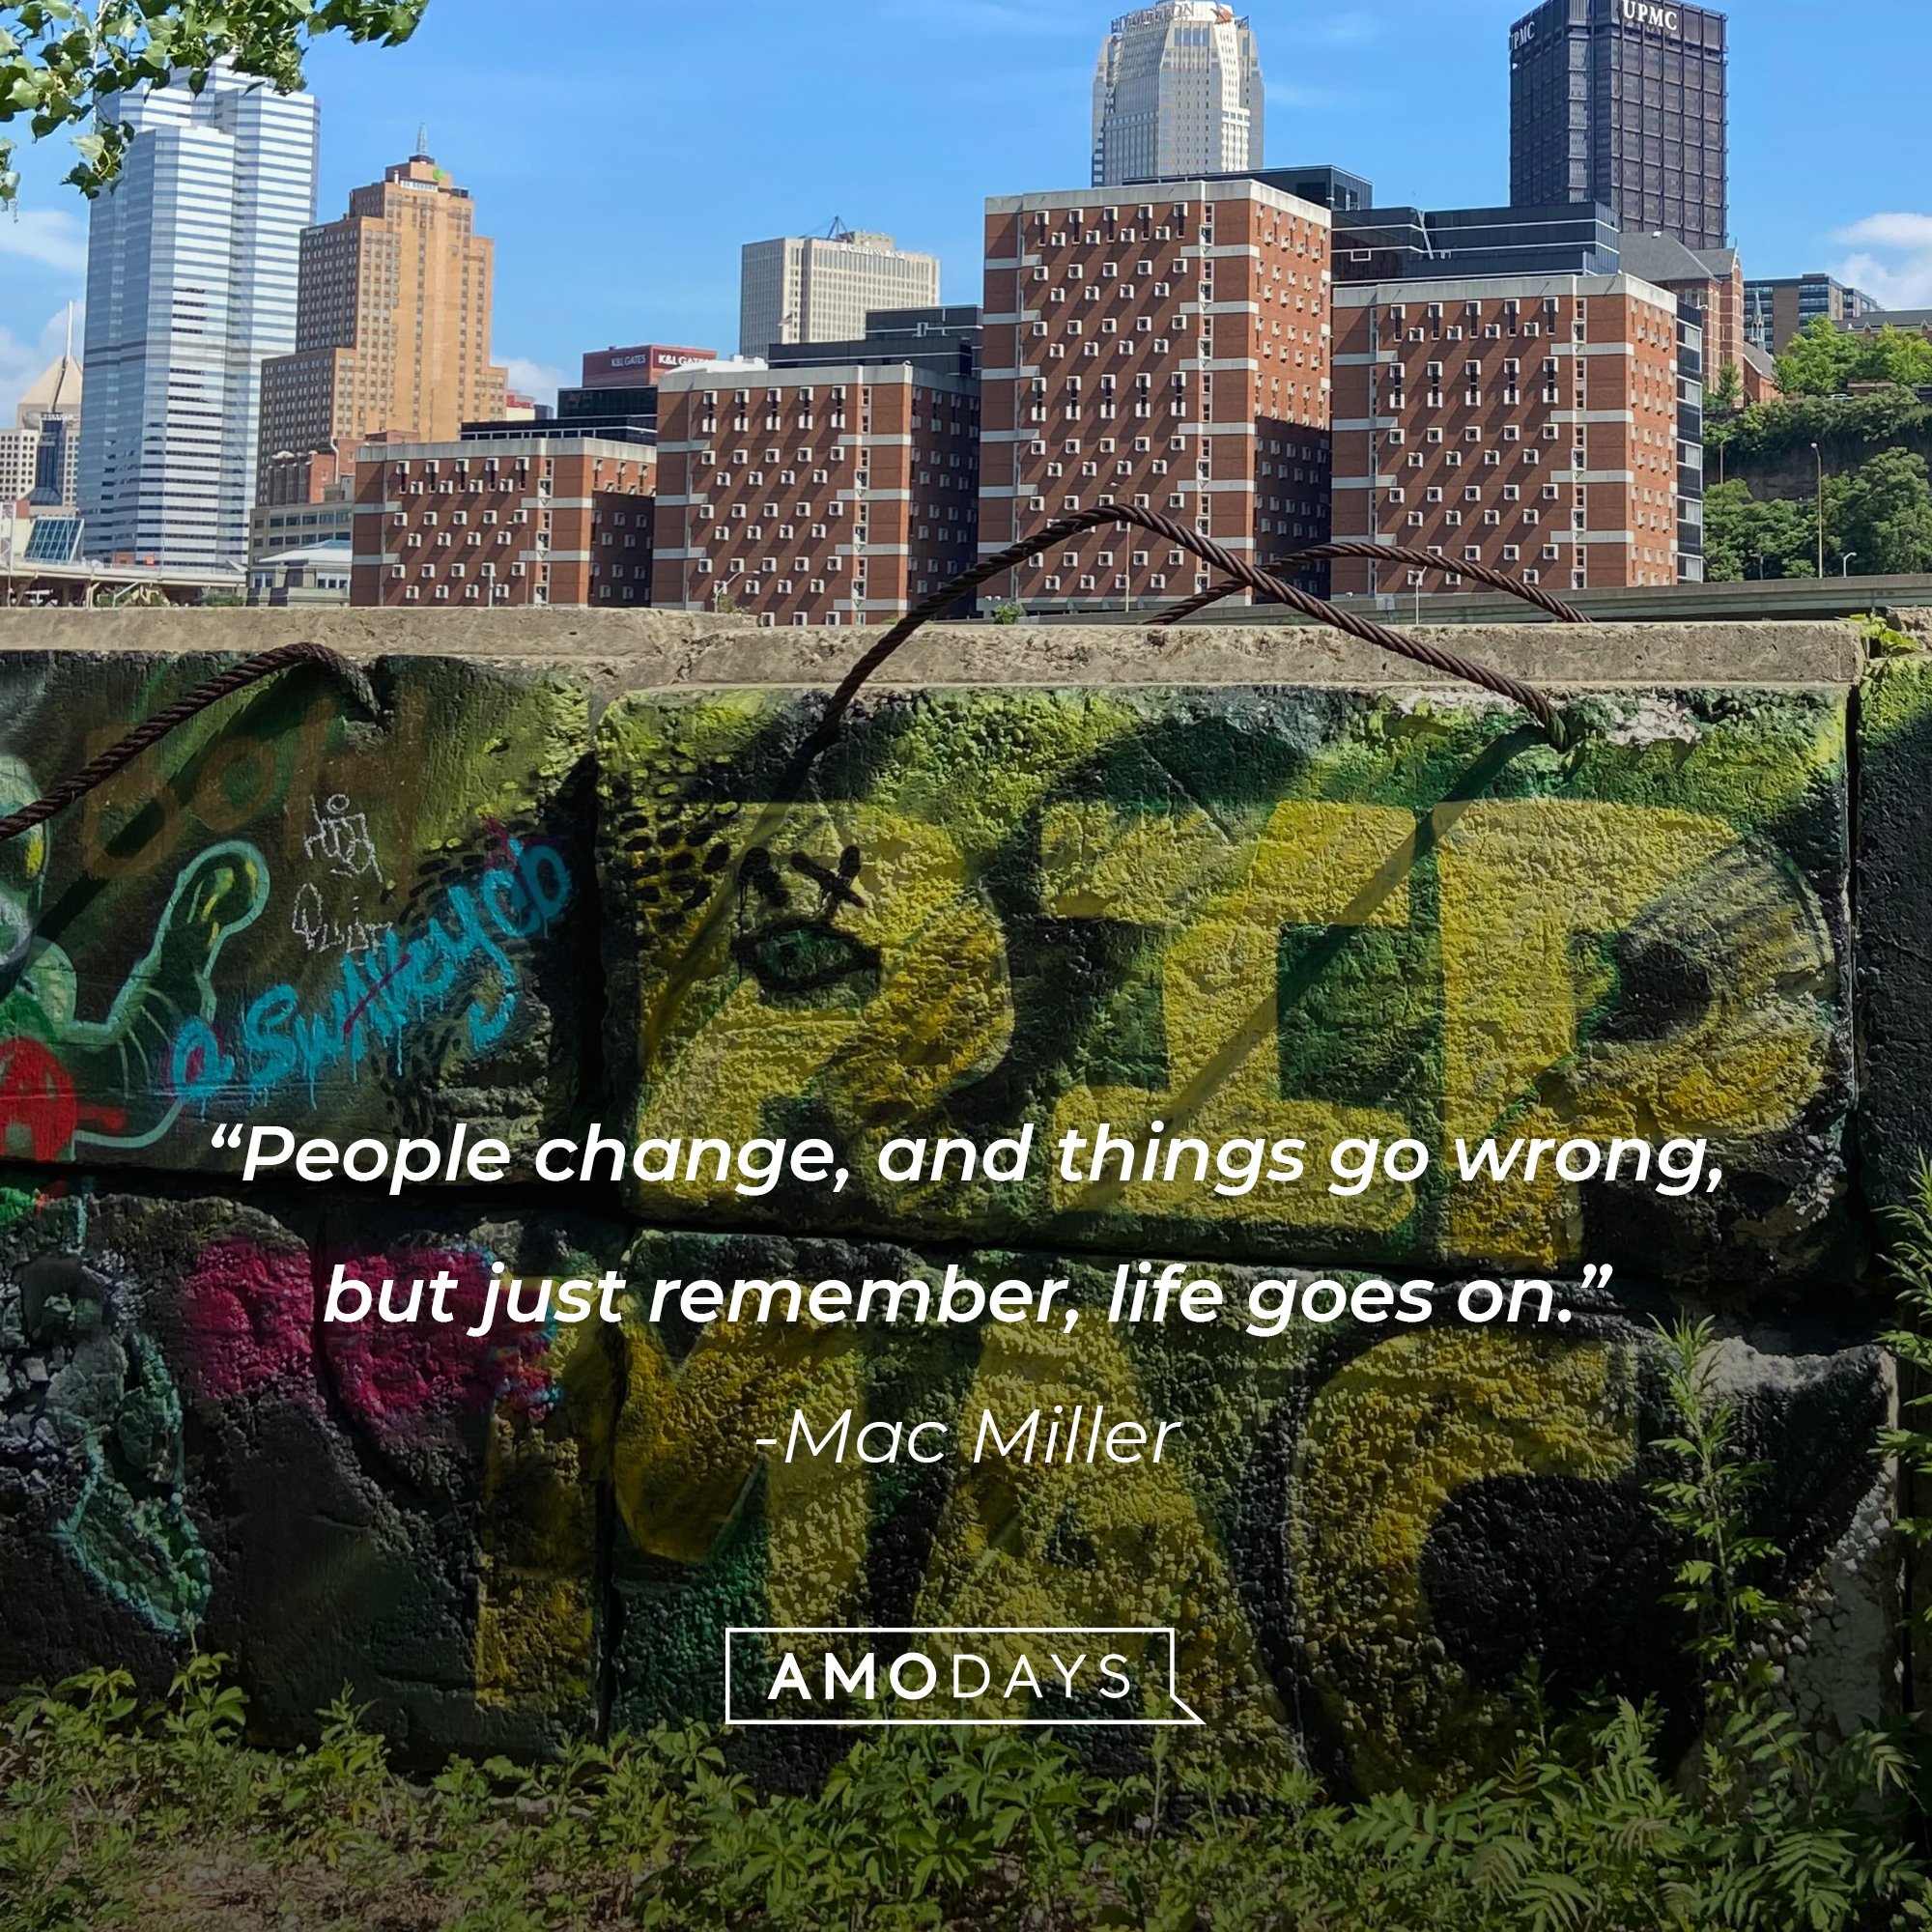 Mac Miller's quote: “People change, and things go wrong, but just remember, life goes on.” │Image: AmoDays